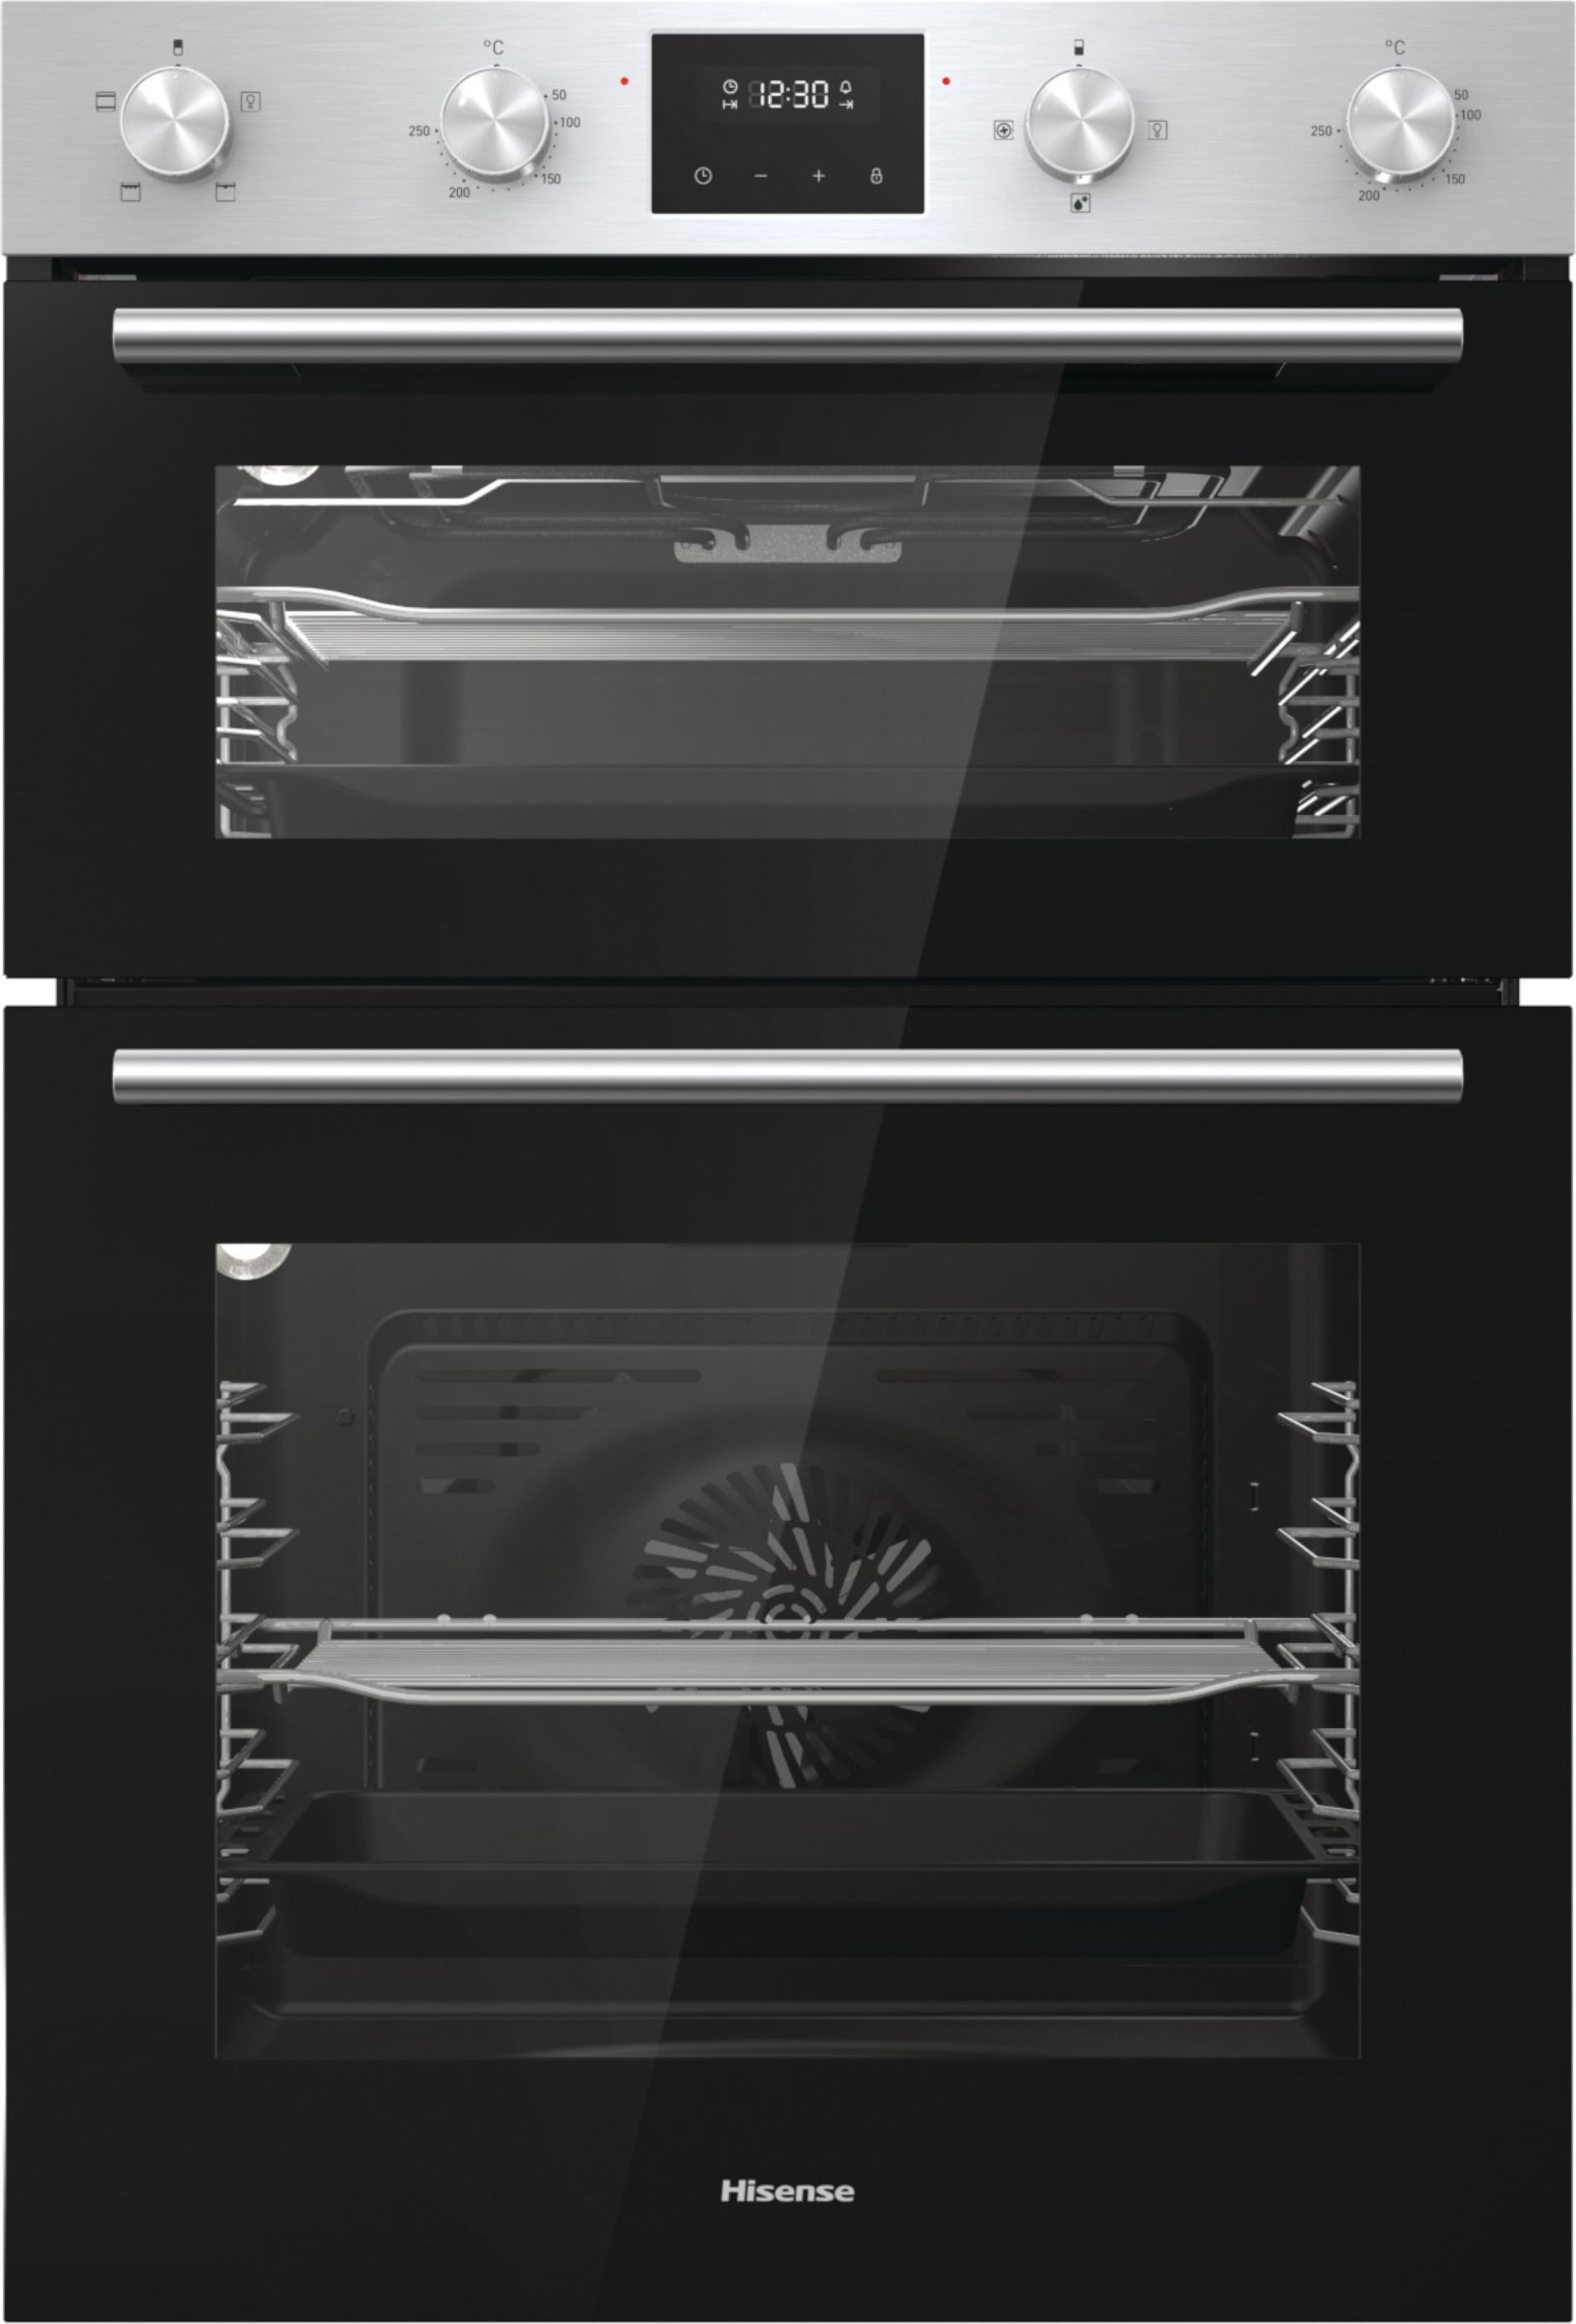 Hisense BID95211XUK Built In Electric Double Oven - Stainless Steel - A/A Rated, Stainless Steel